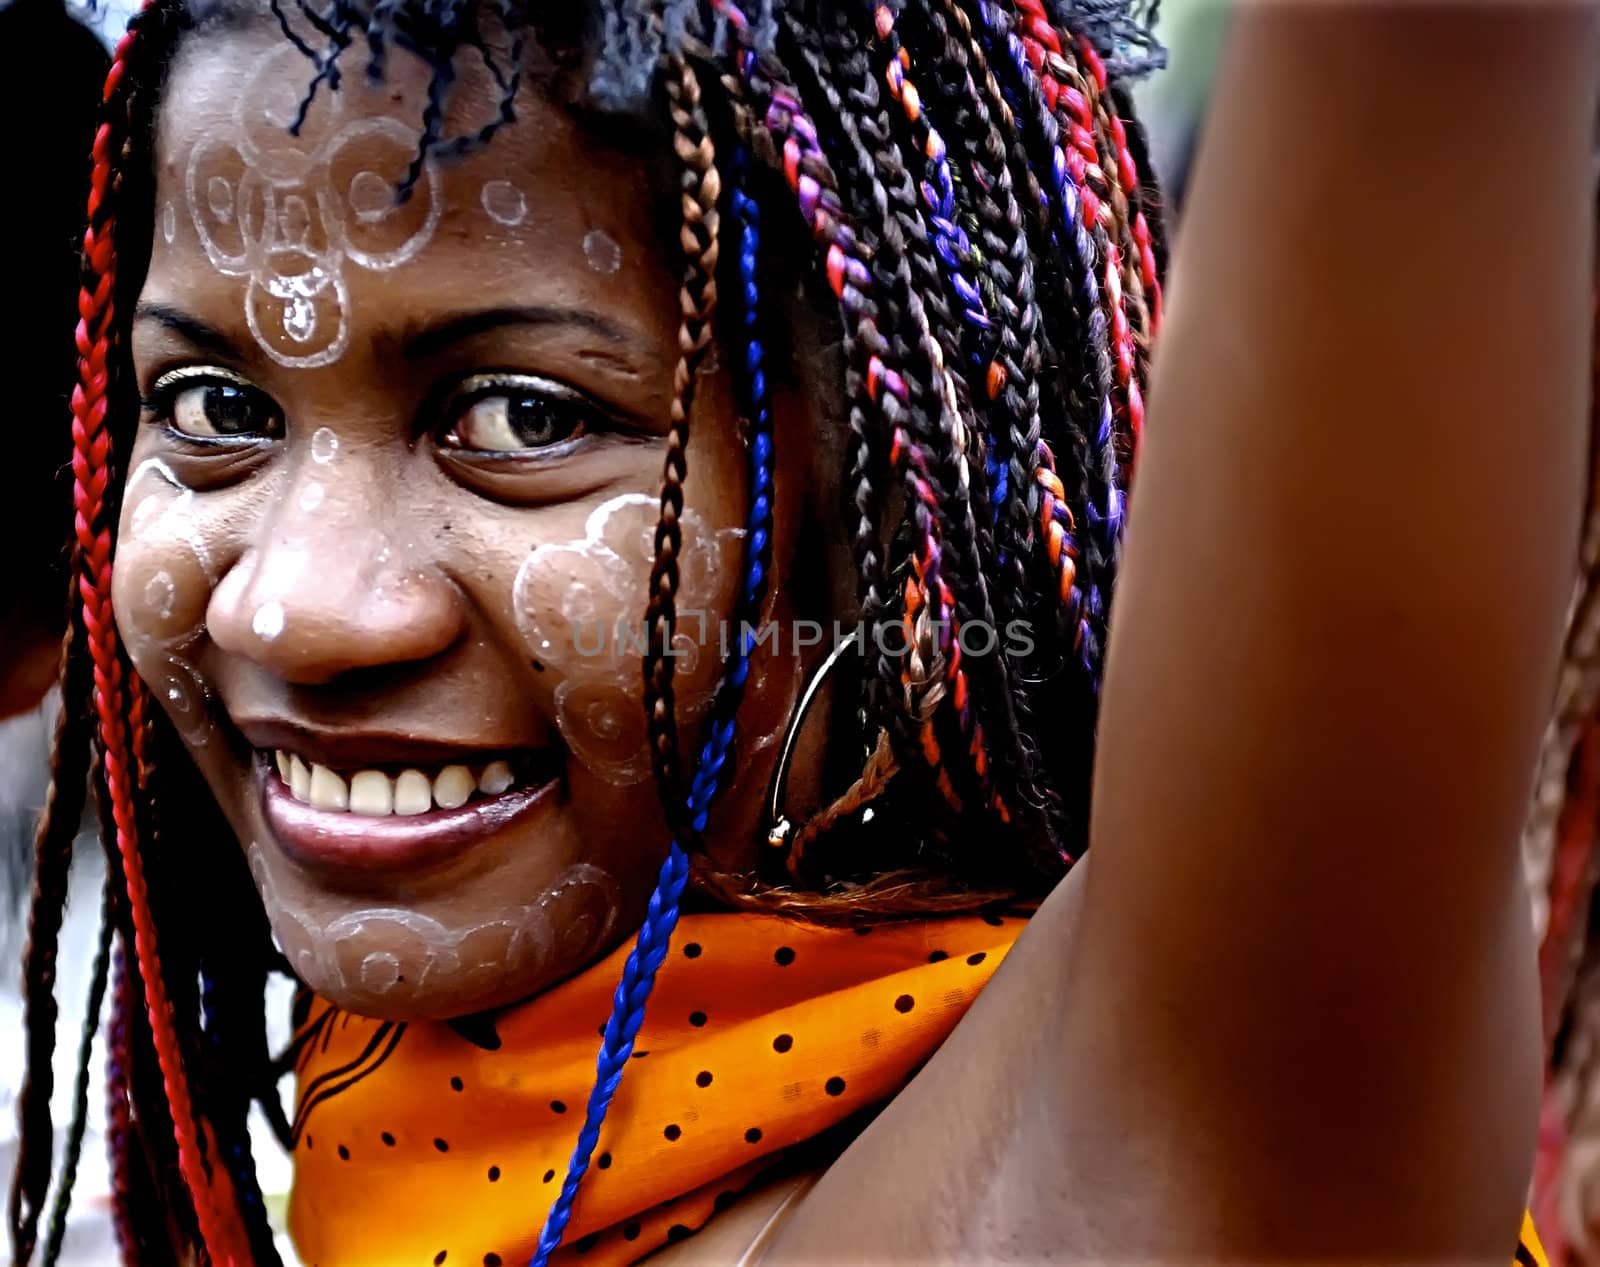 madagascan girl with colourful braids by jackq